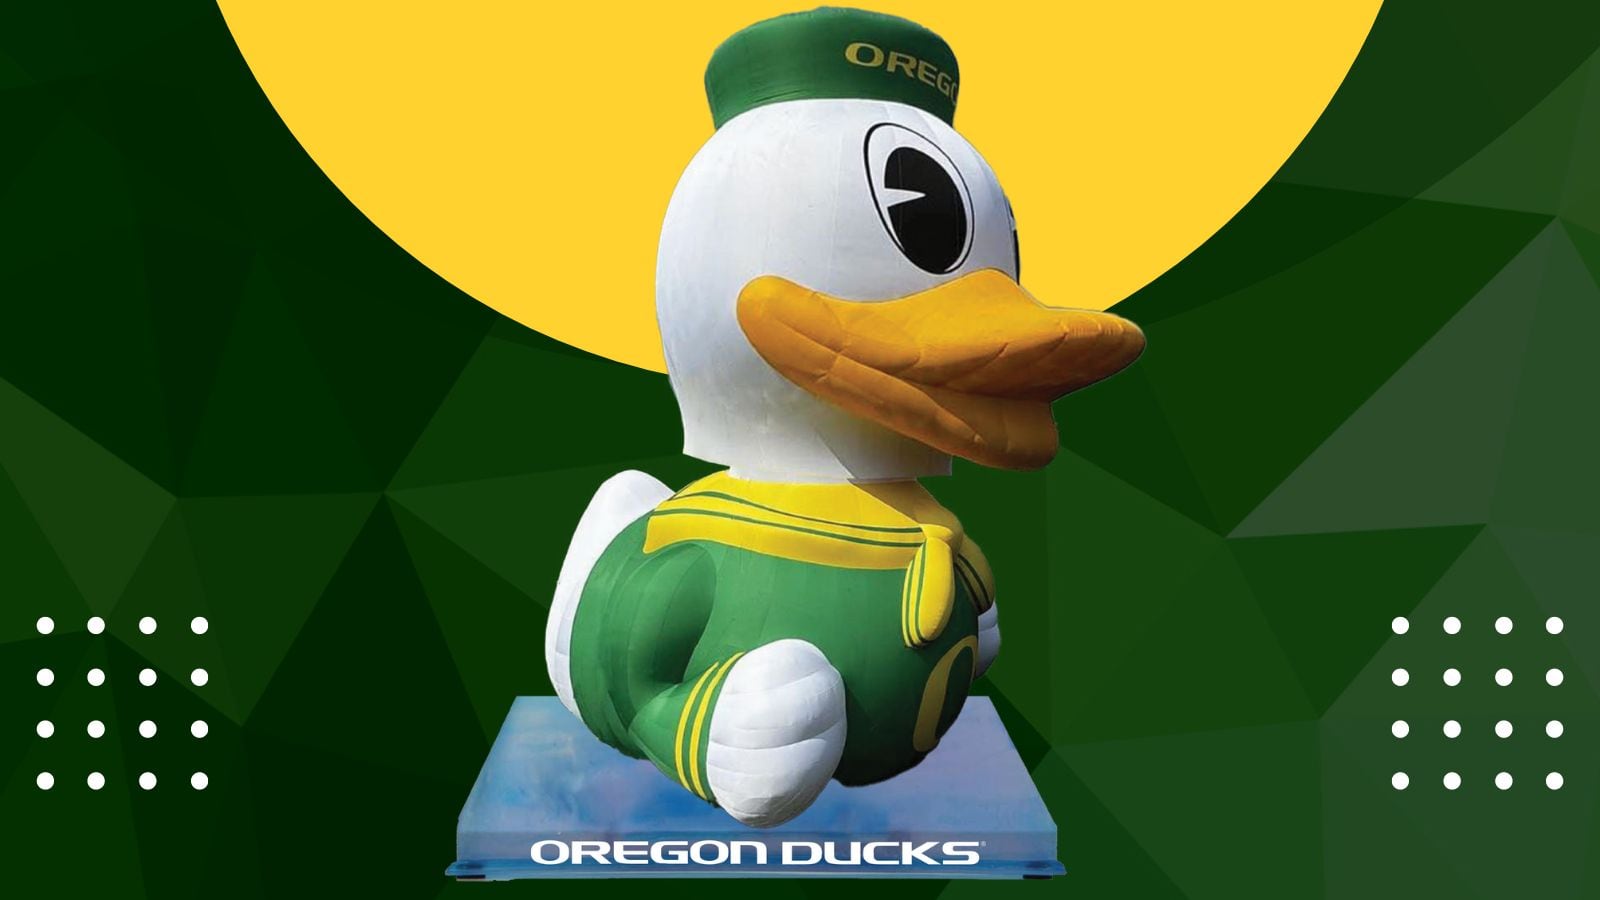  Giant, inflatable Oregon Duck mascot is getting its own bobblehead 